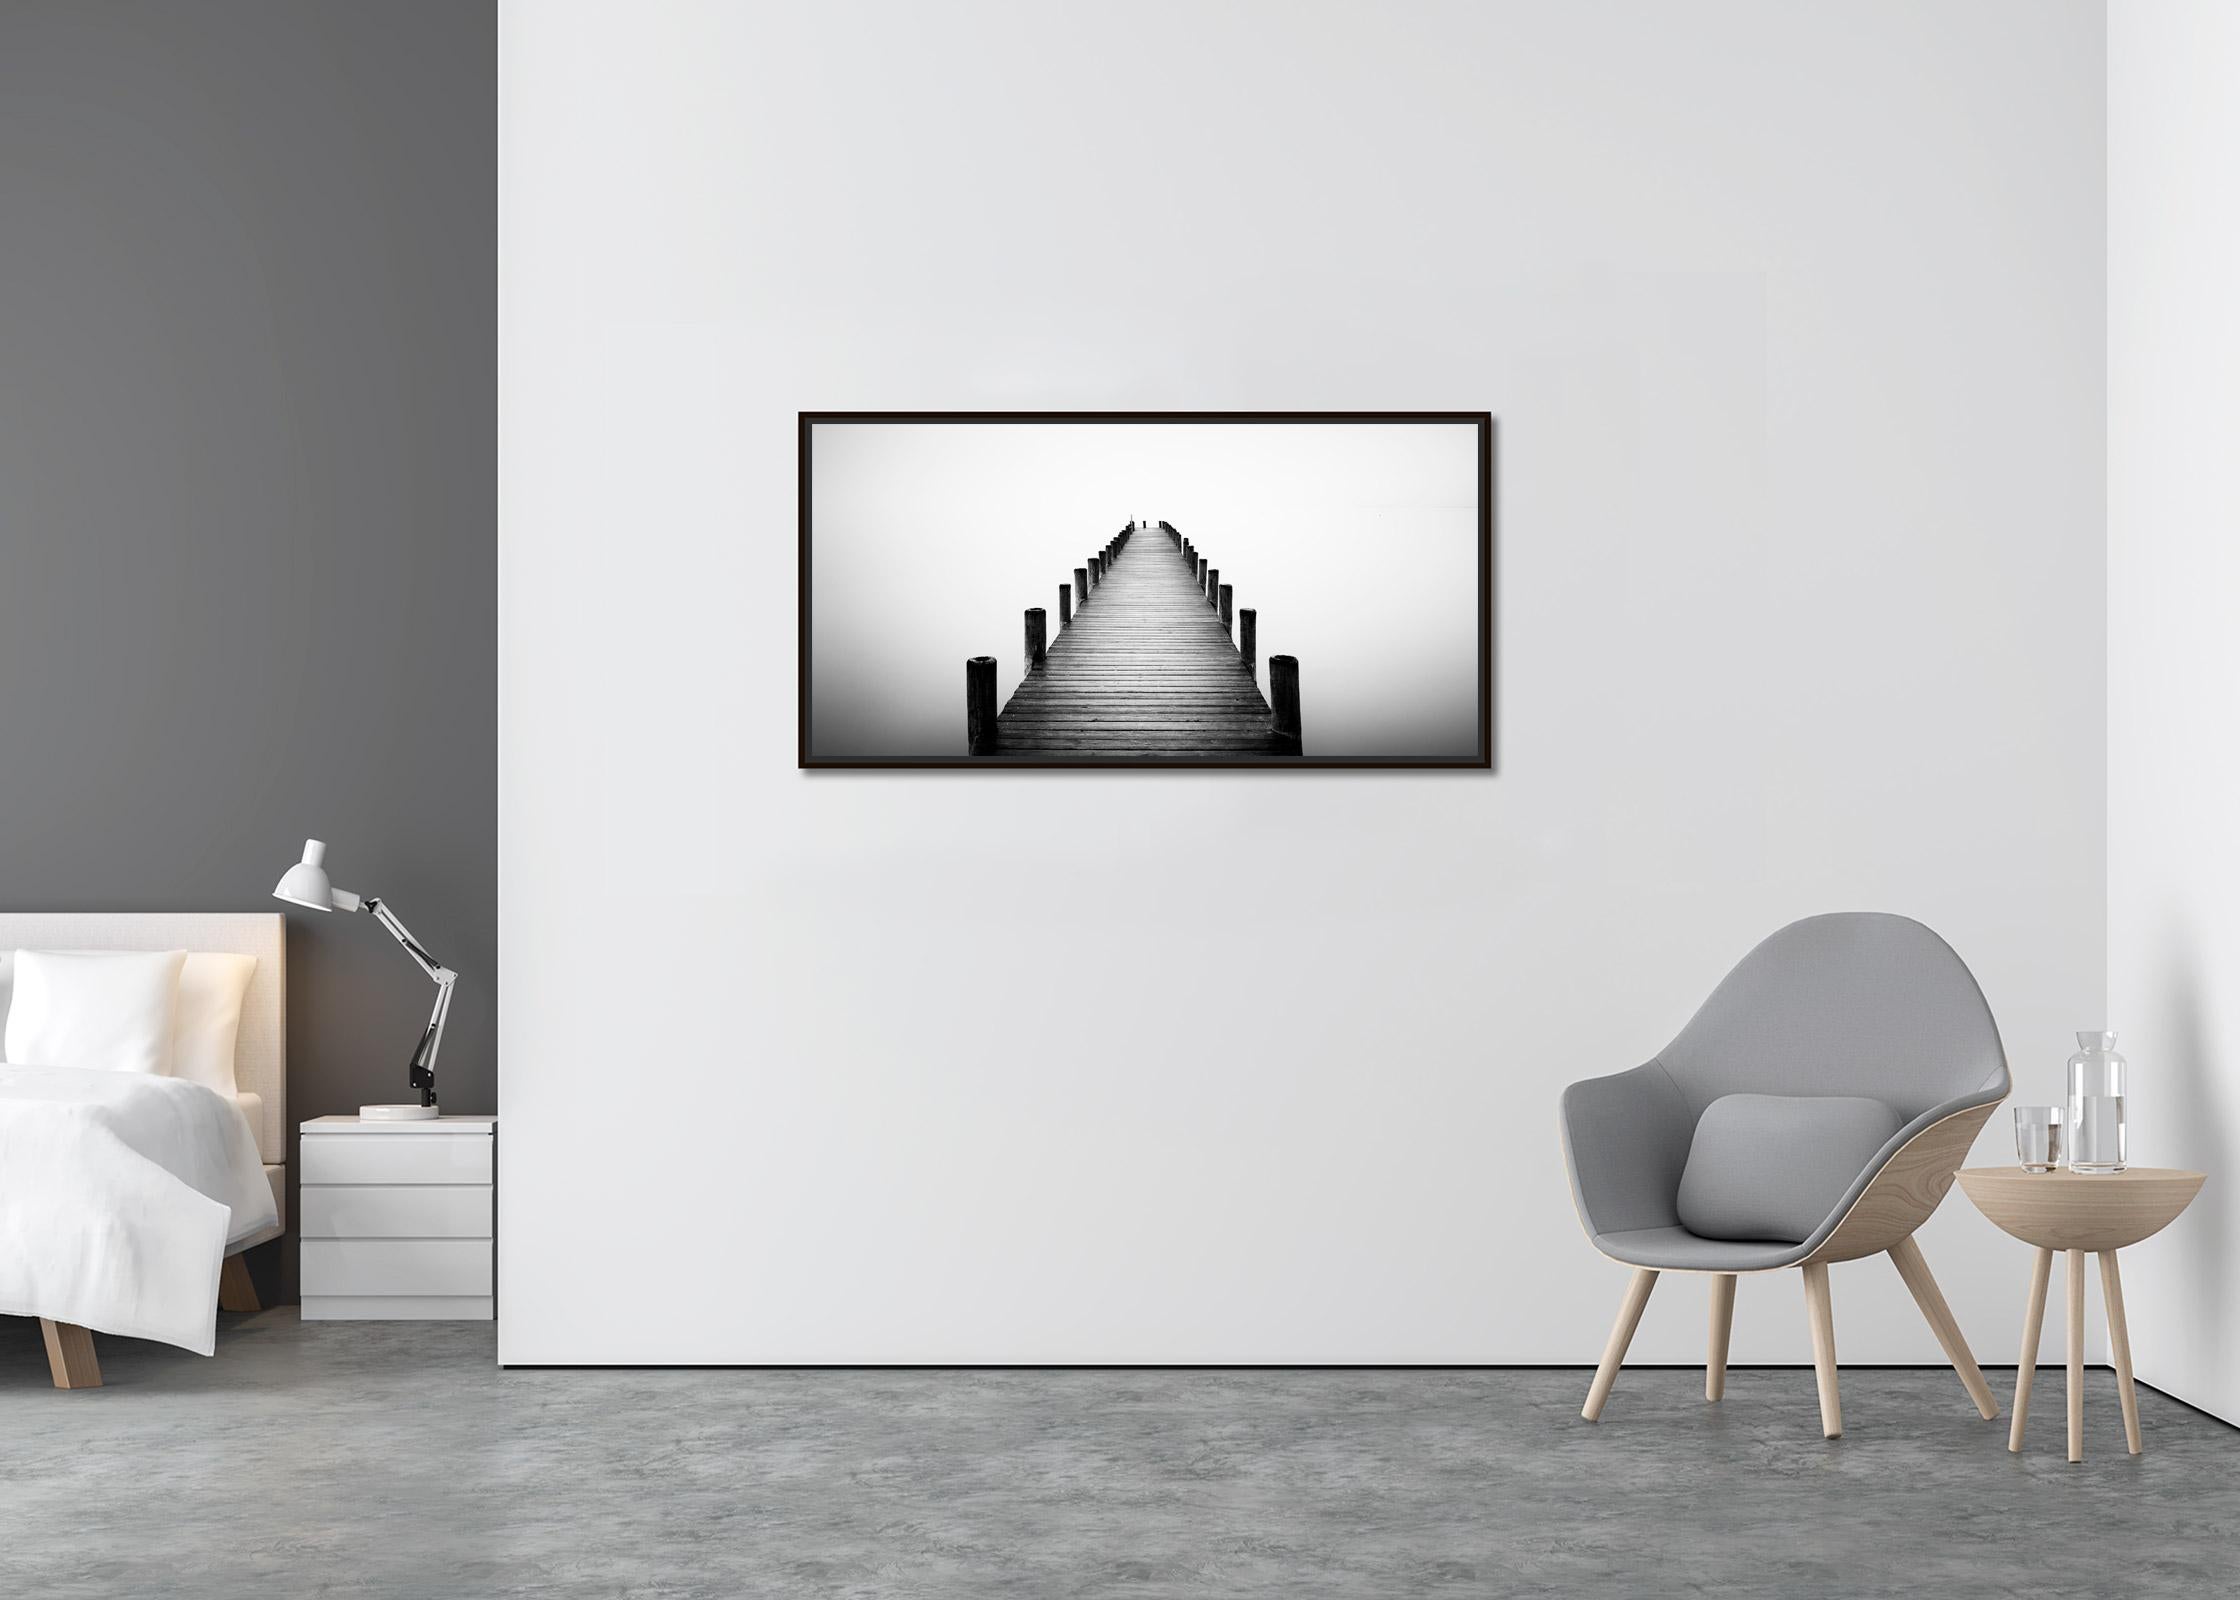 Pier on misty Lake Panorama, black and white long exposure waterscape art photo - Contemporary Photograph by Gerald Berghammer